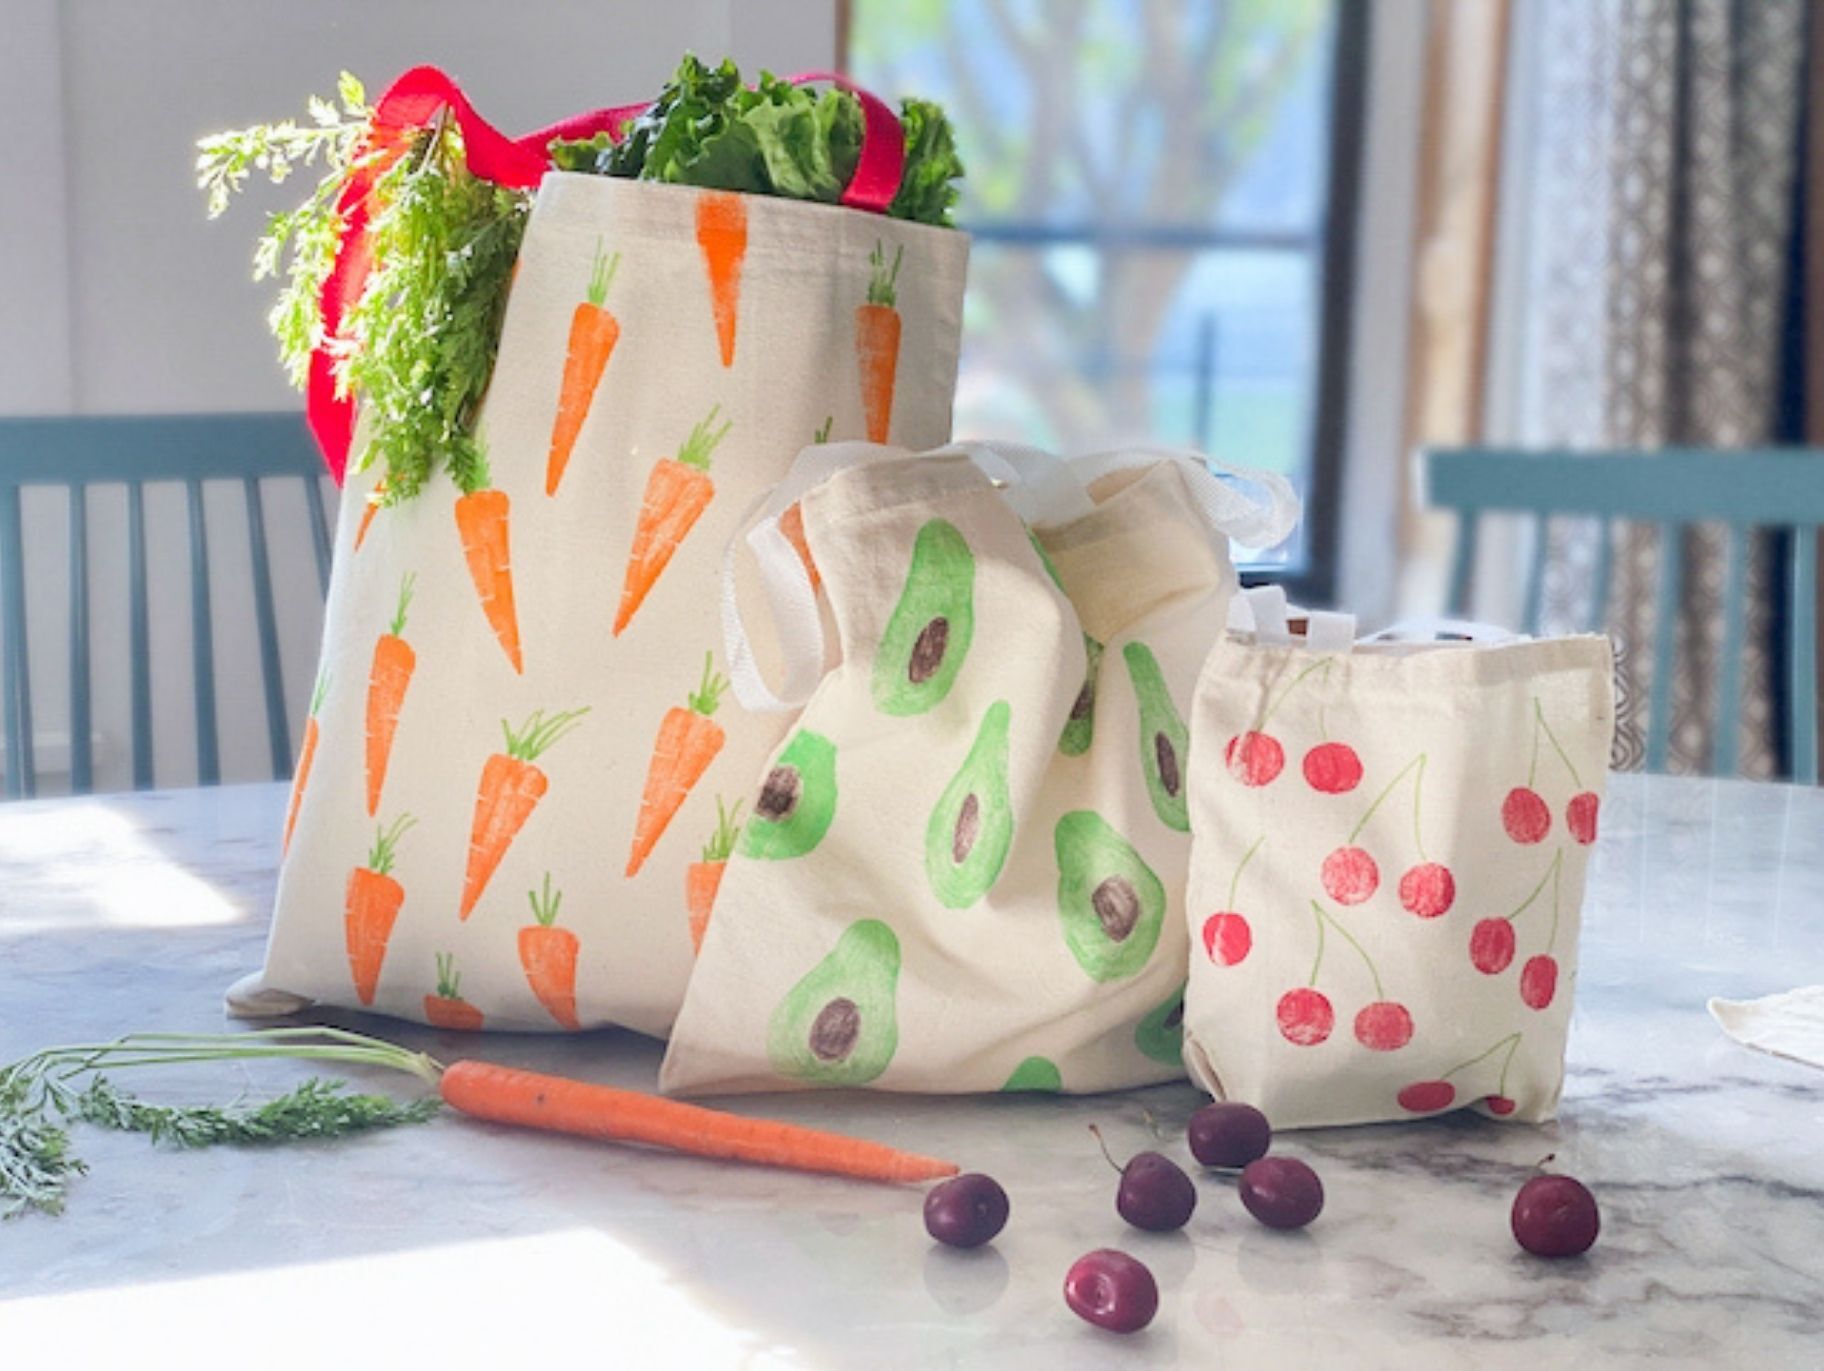 The Best Stylish Bags and Baskets for Farmers Markets | Decor Trends &  Design News | HGTV